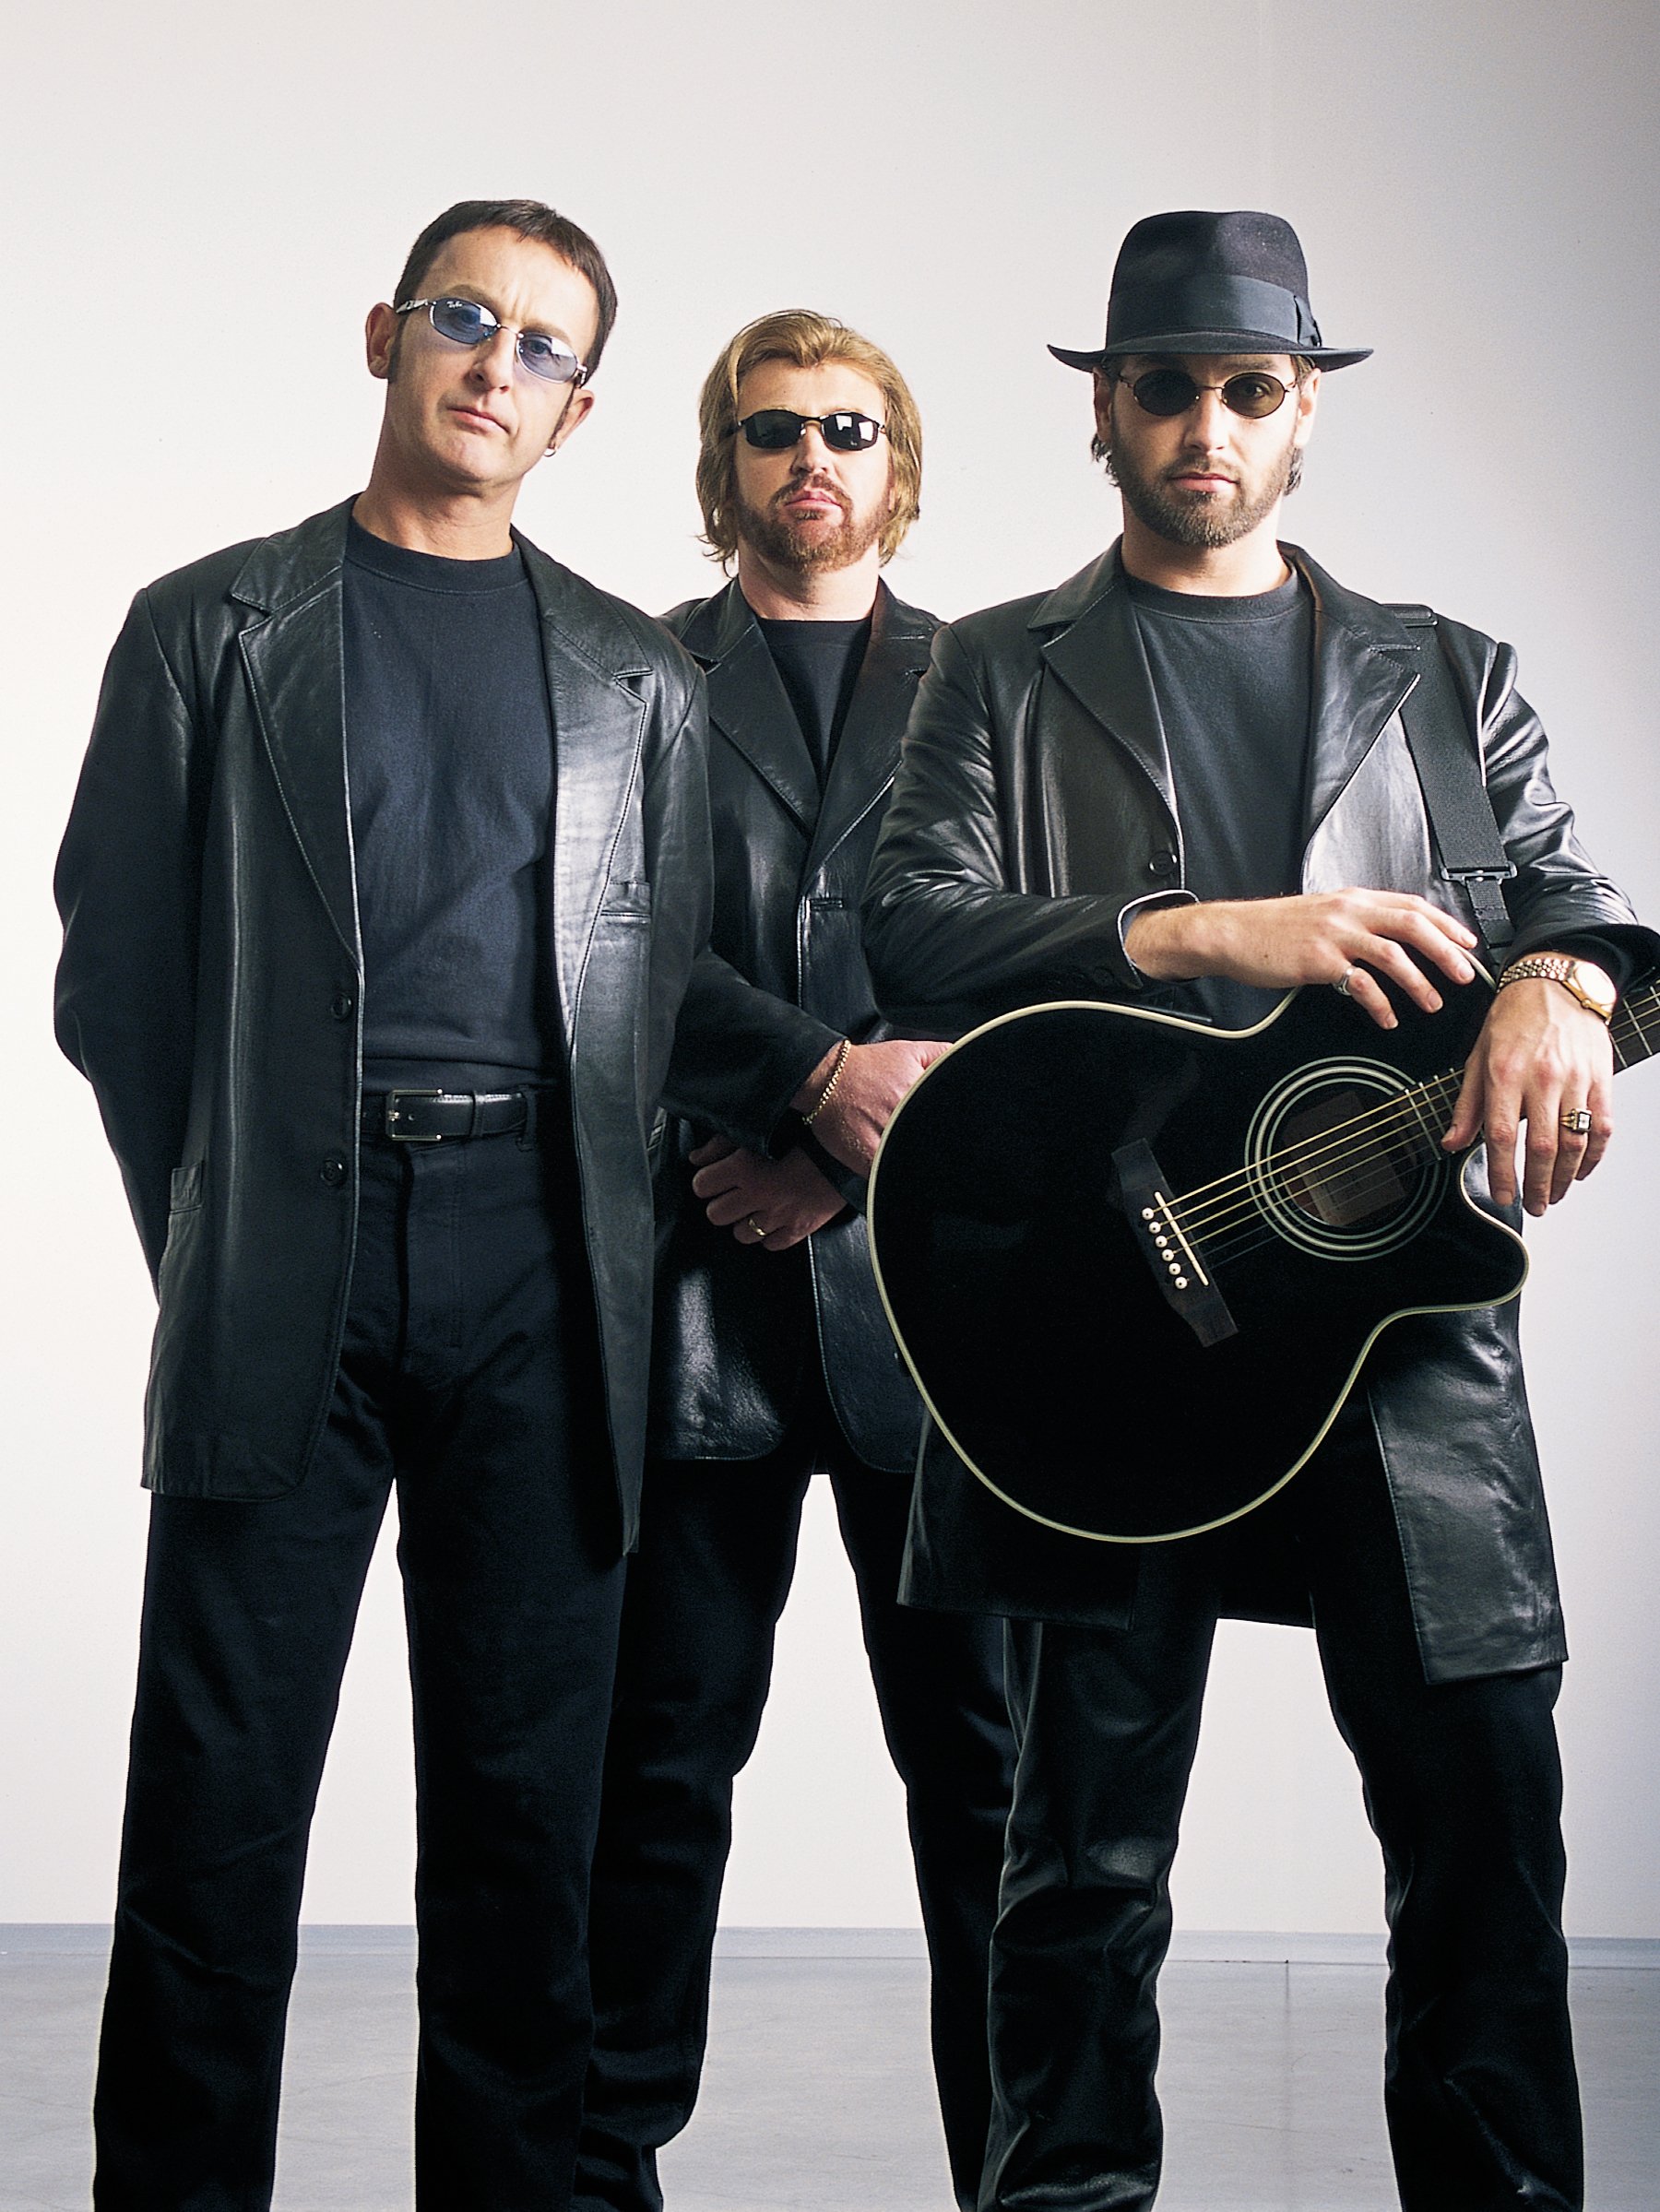 Shows: The Australian Bee Gees